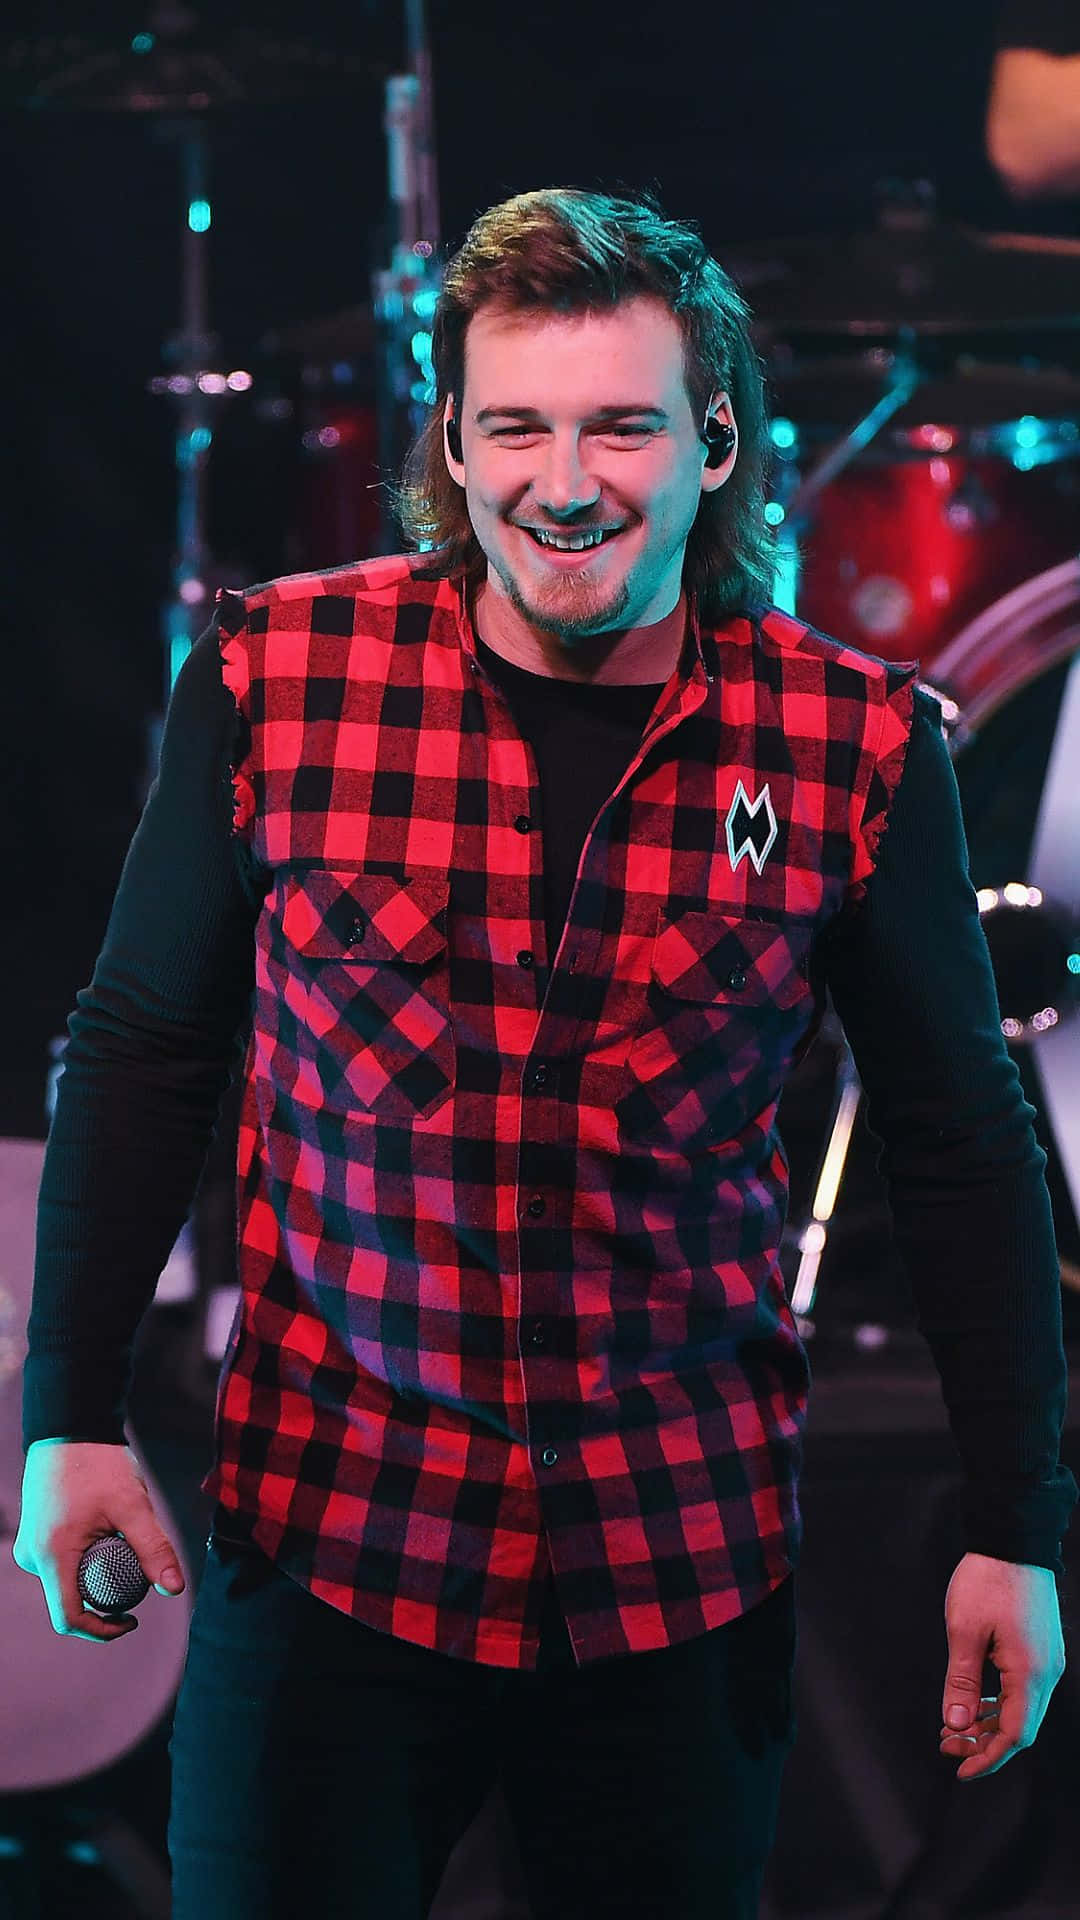 A Man In A Red And Black Plaid Shirt Is Smiling